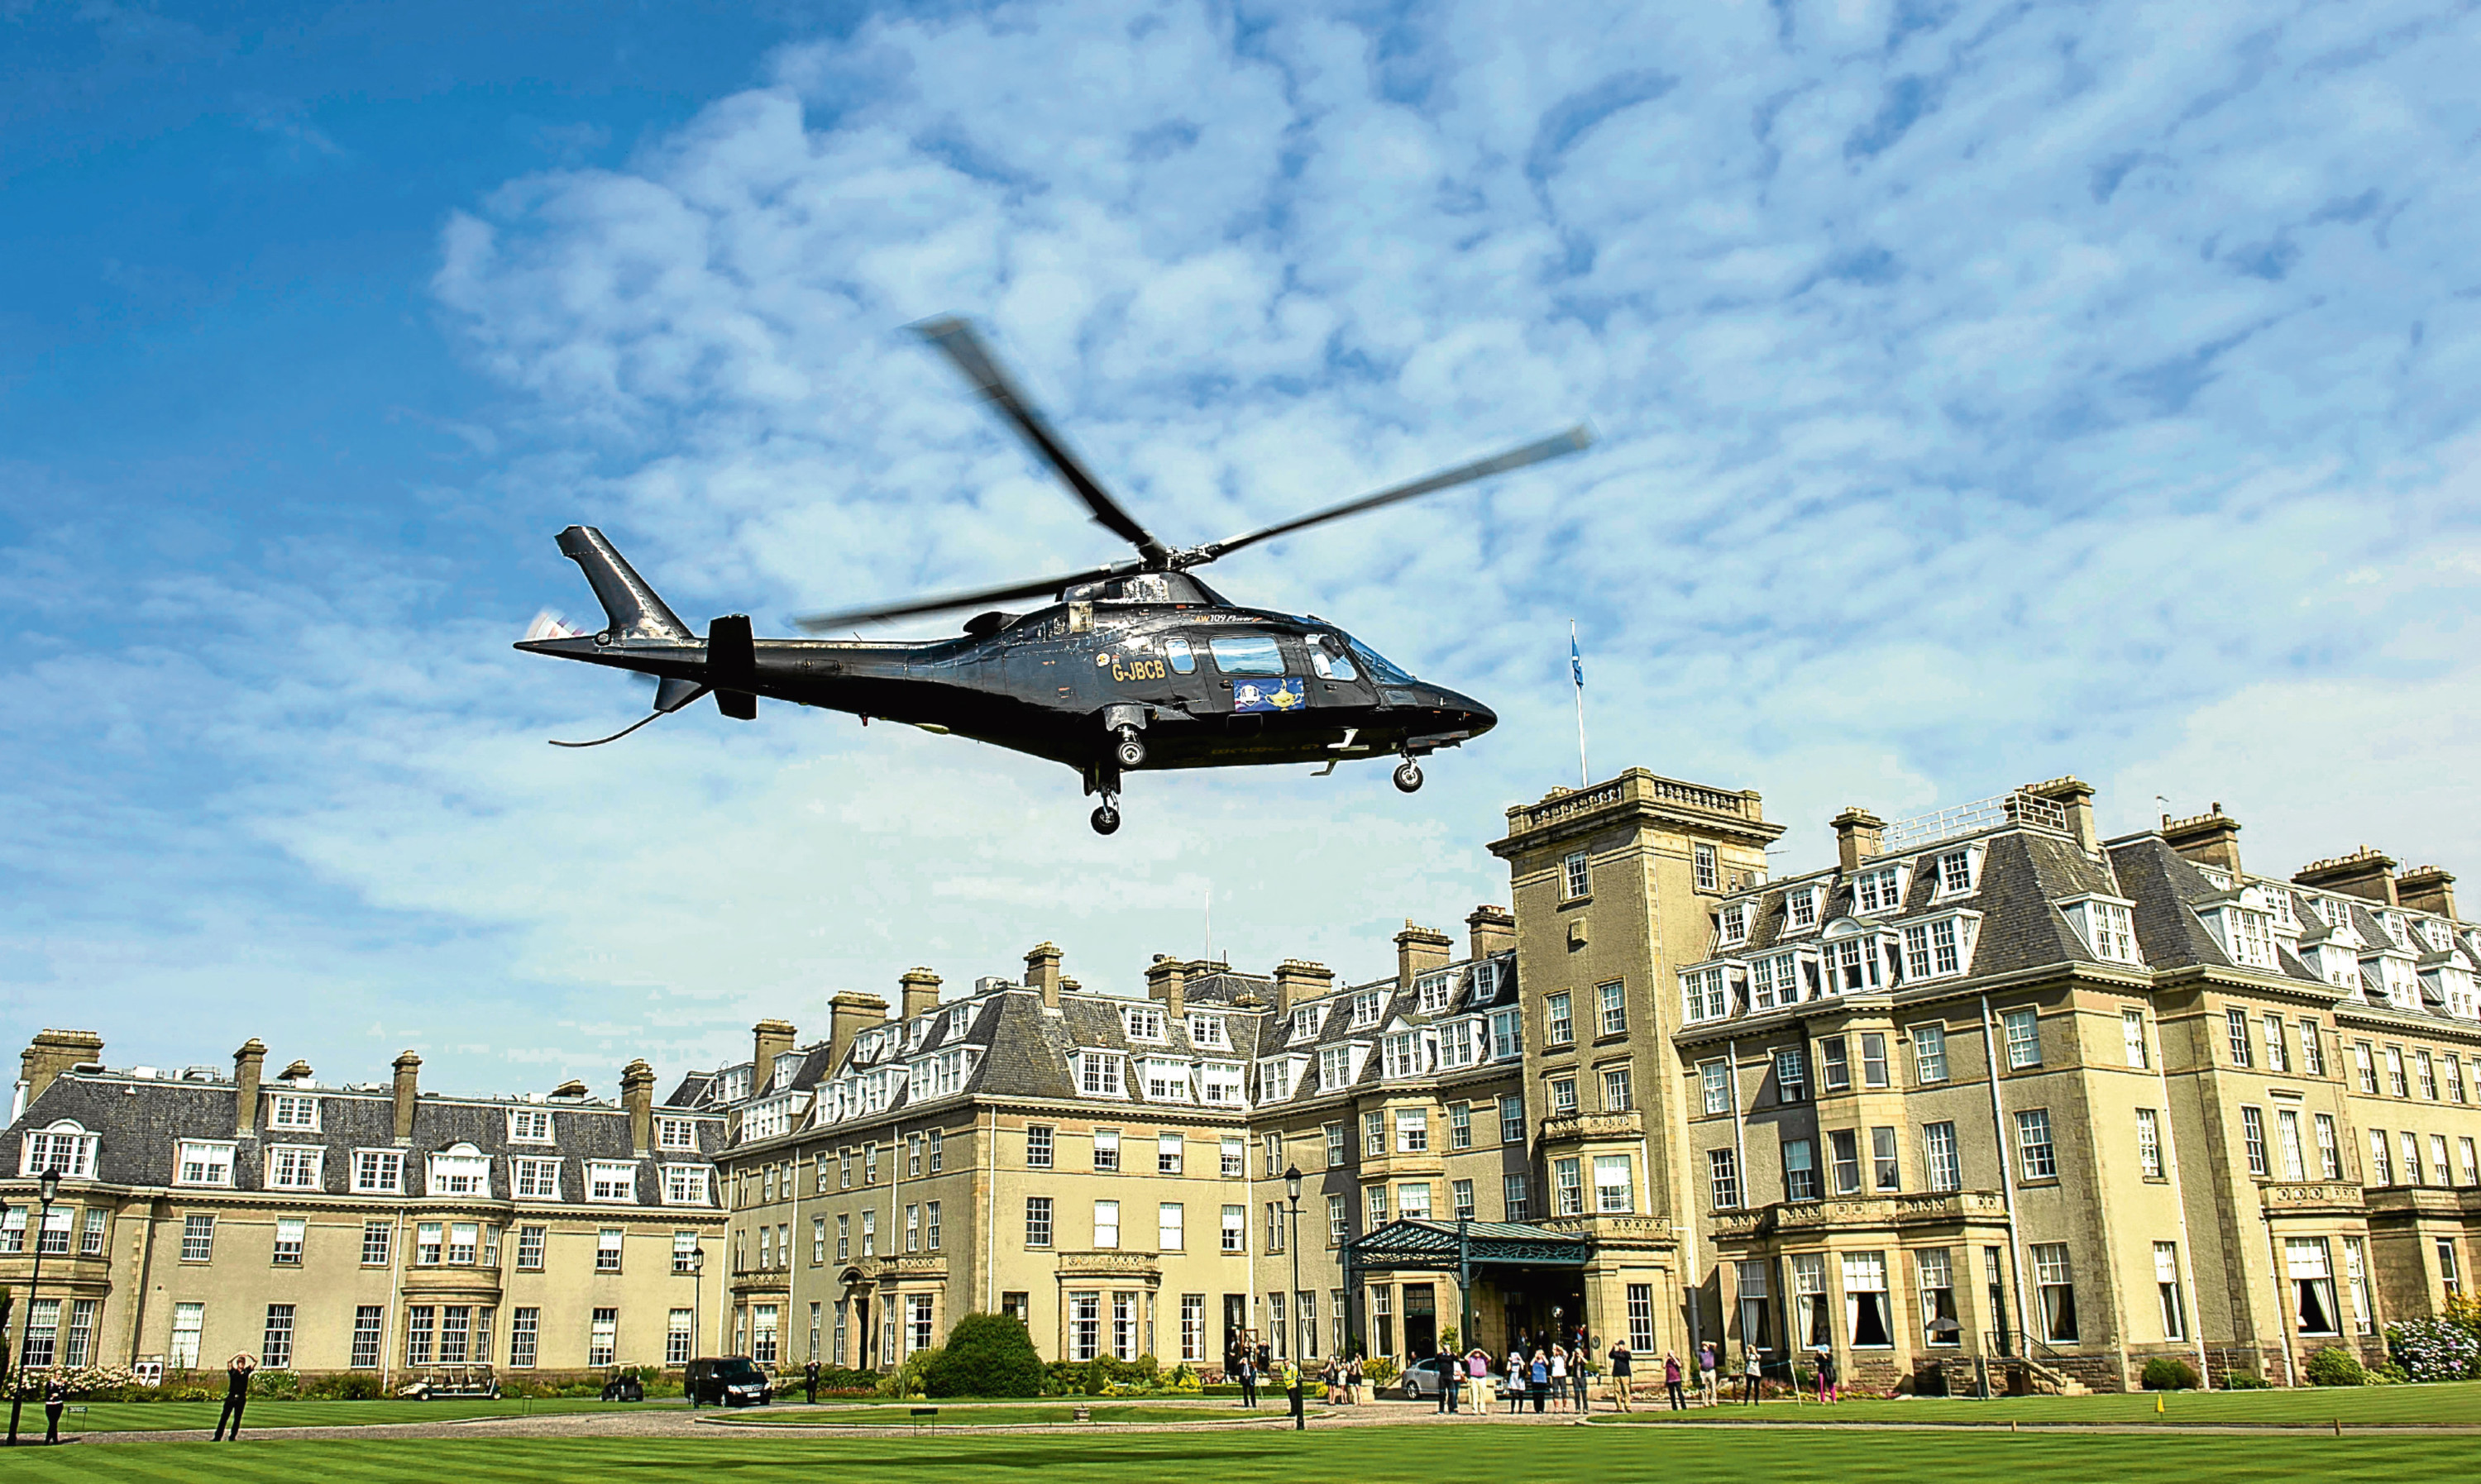 A helicopter lands at Gleneagles Hotel